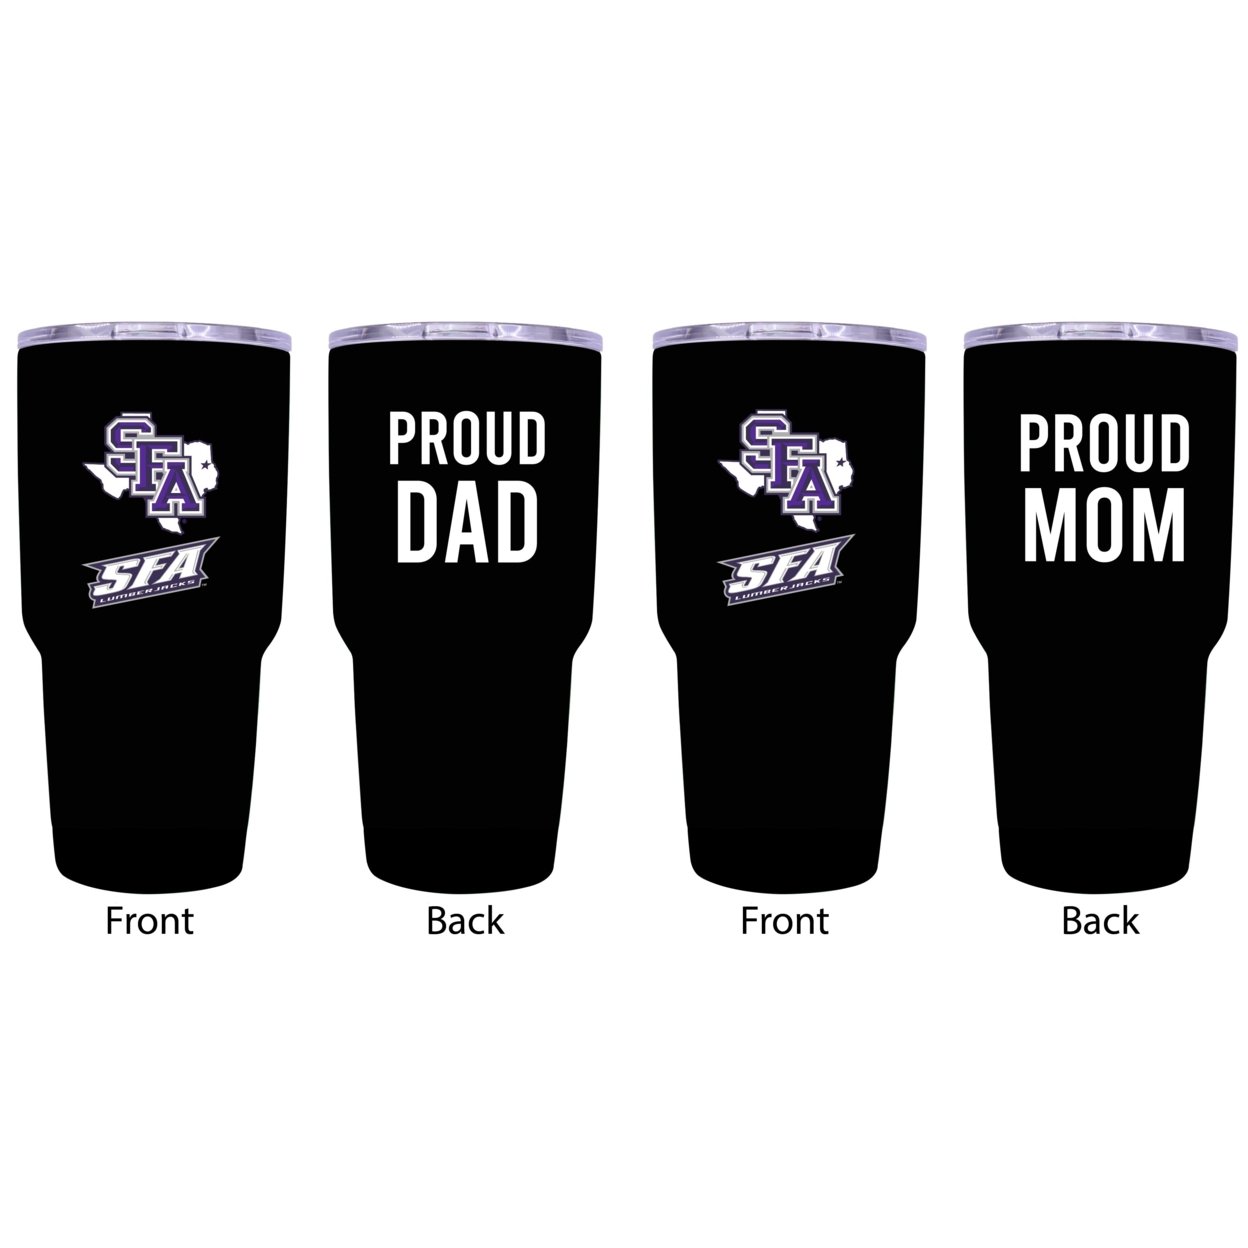 Stephen F. Austin State University Proud Mom And Dad 24 Oz Insulated Stainless Steel Tumblers 2 Pack Black.